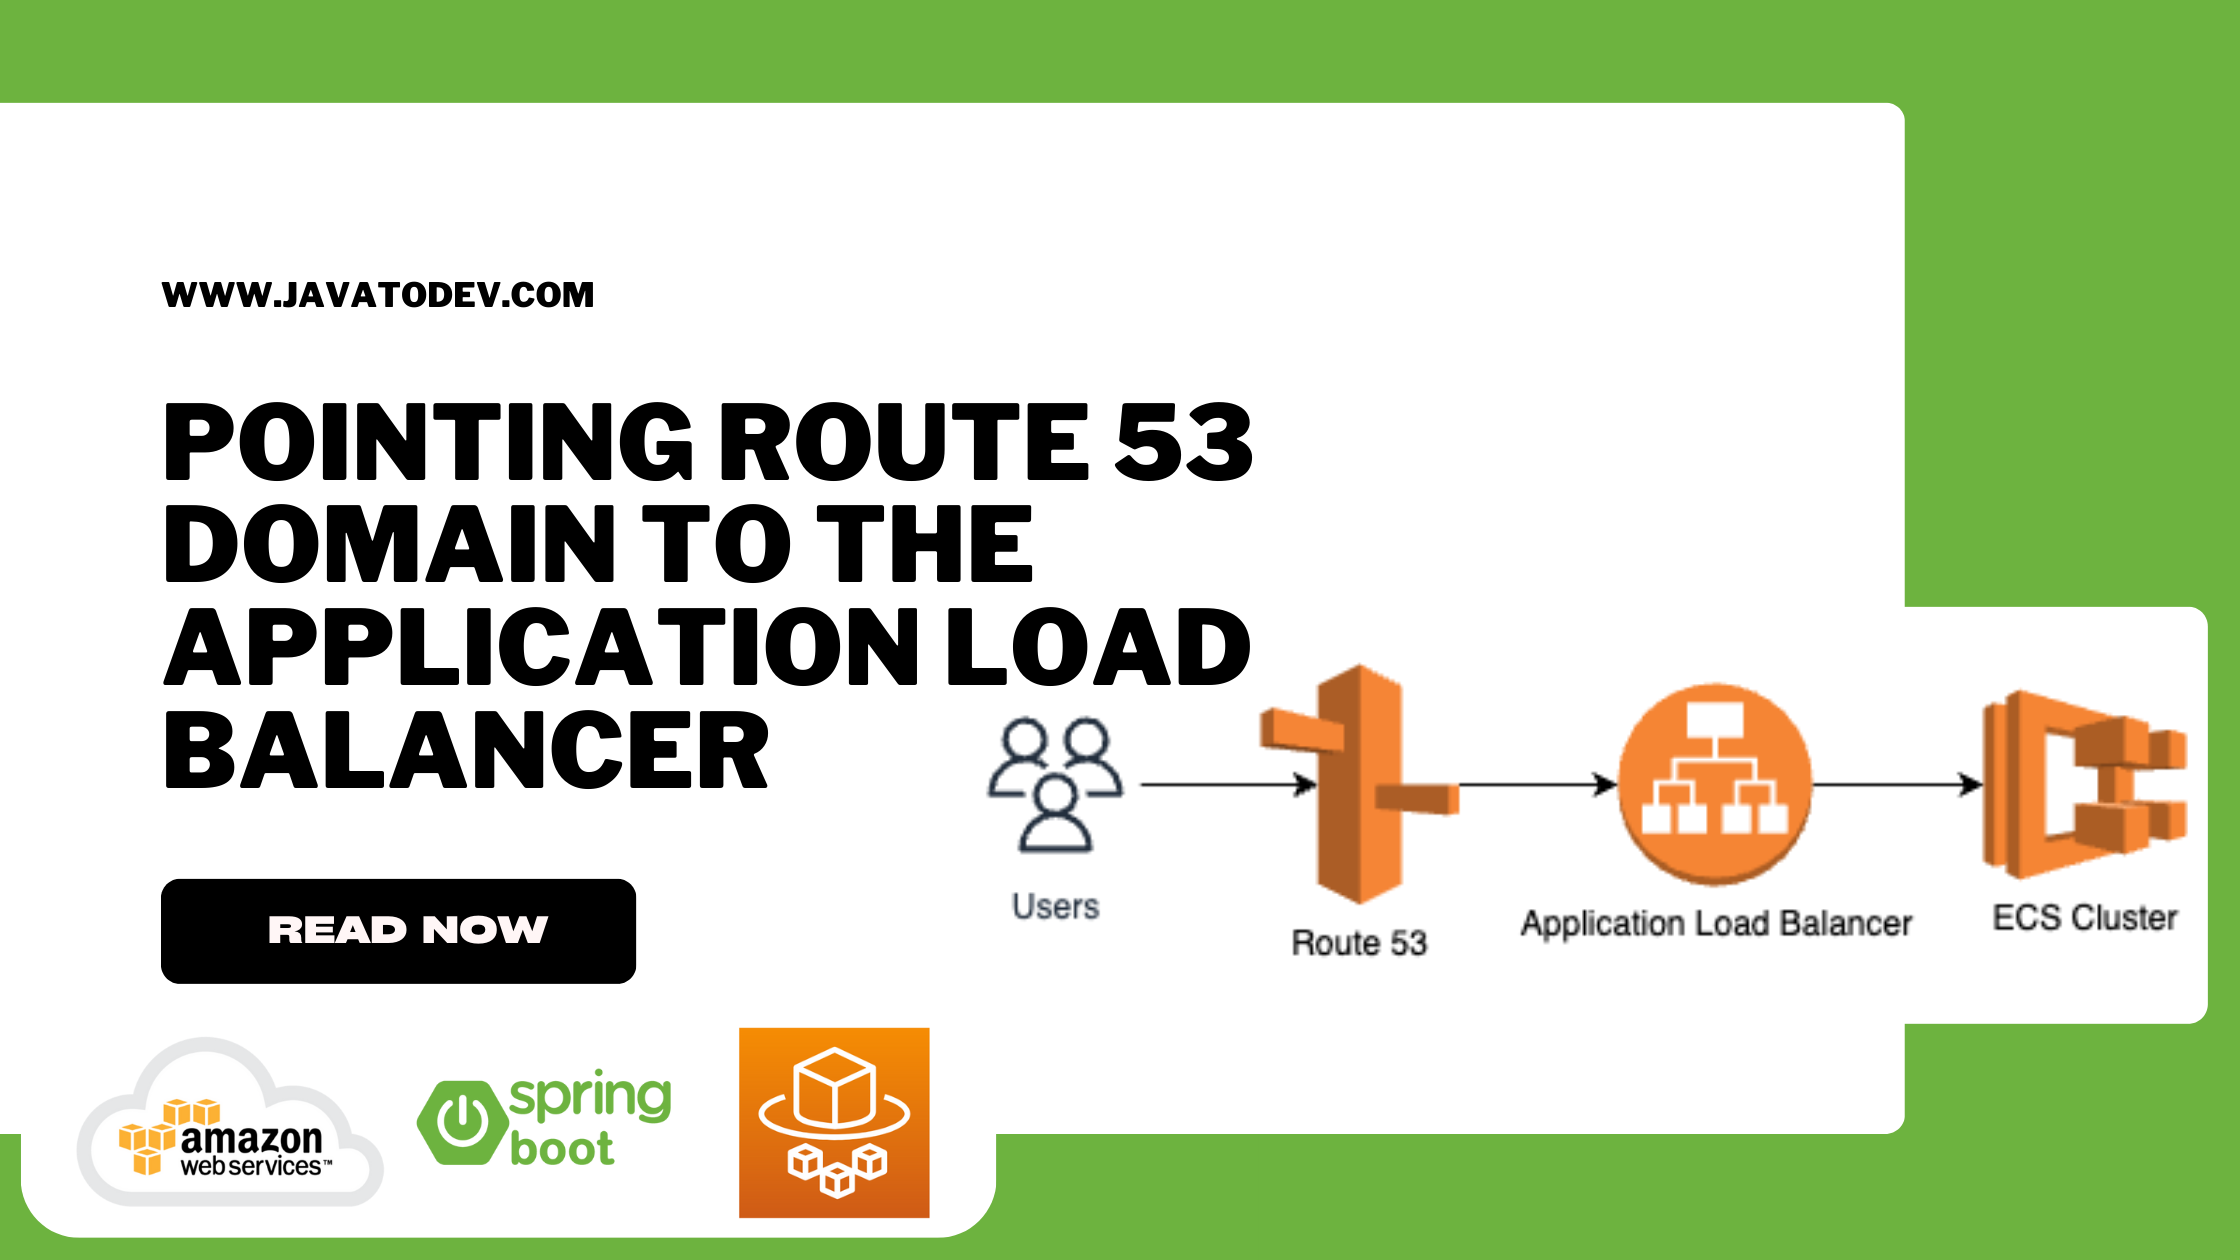 How to Point Route 53 Domain To The Application Load Balancer